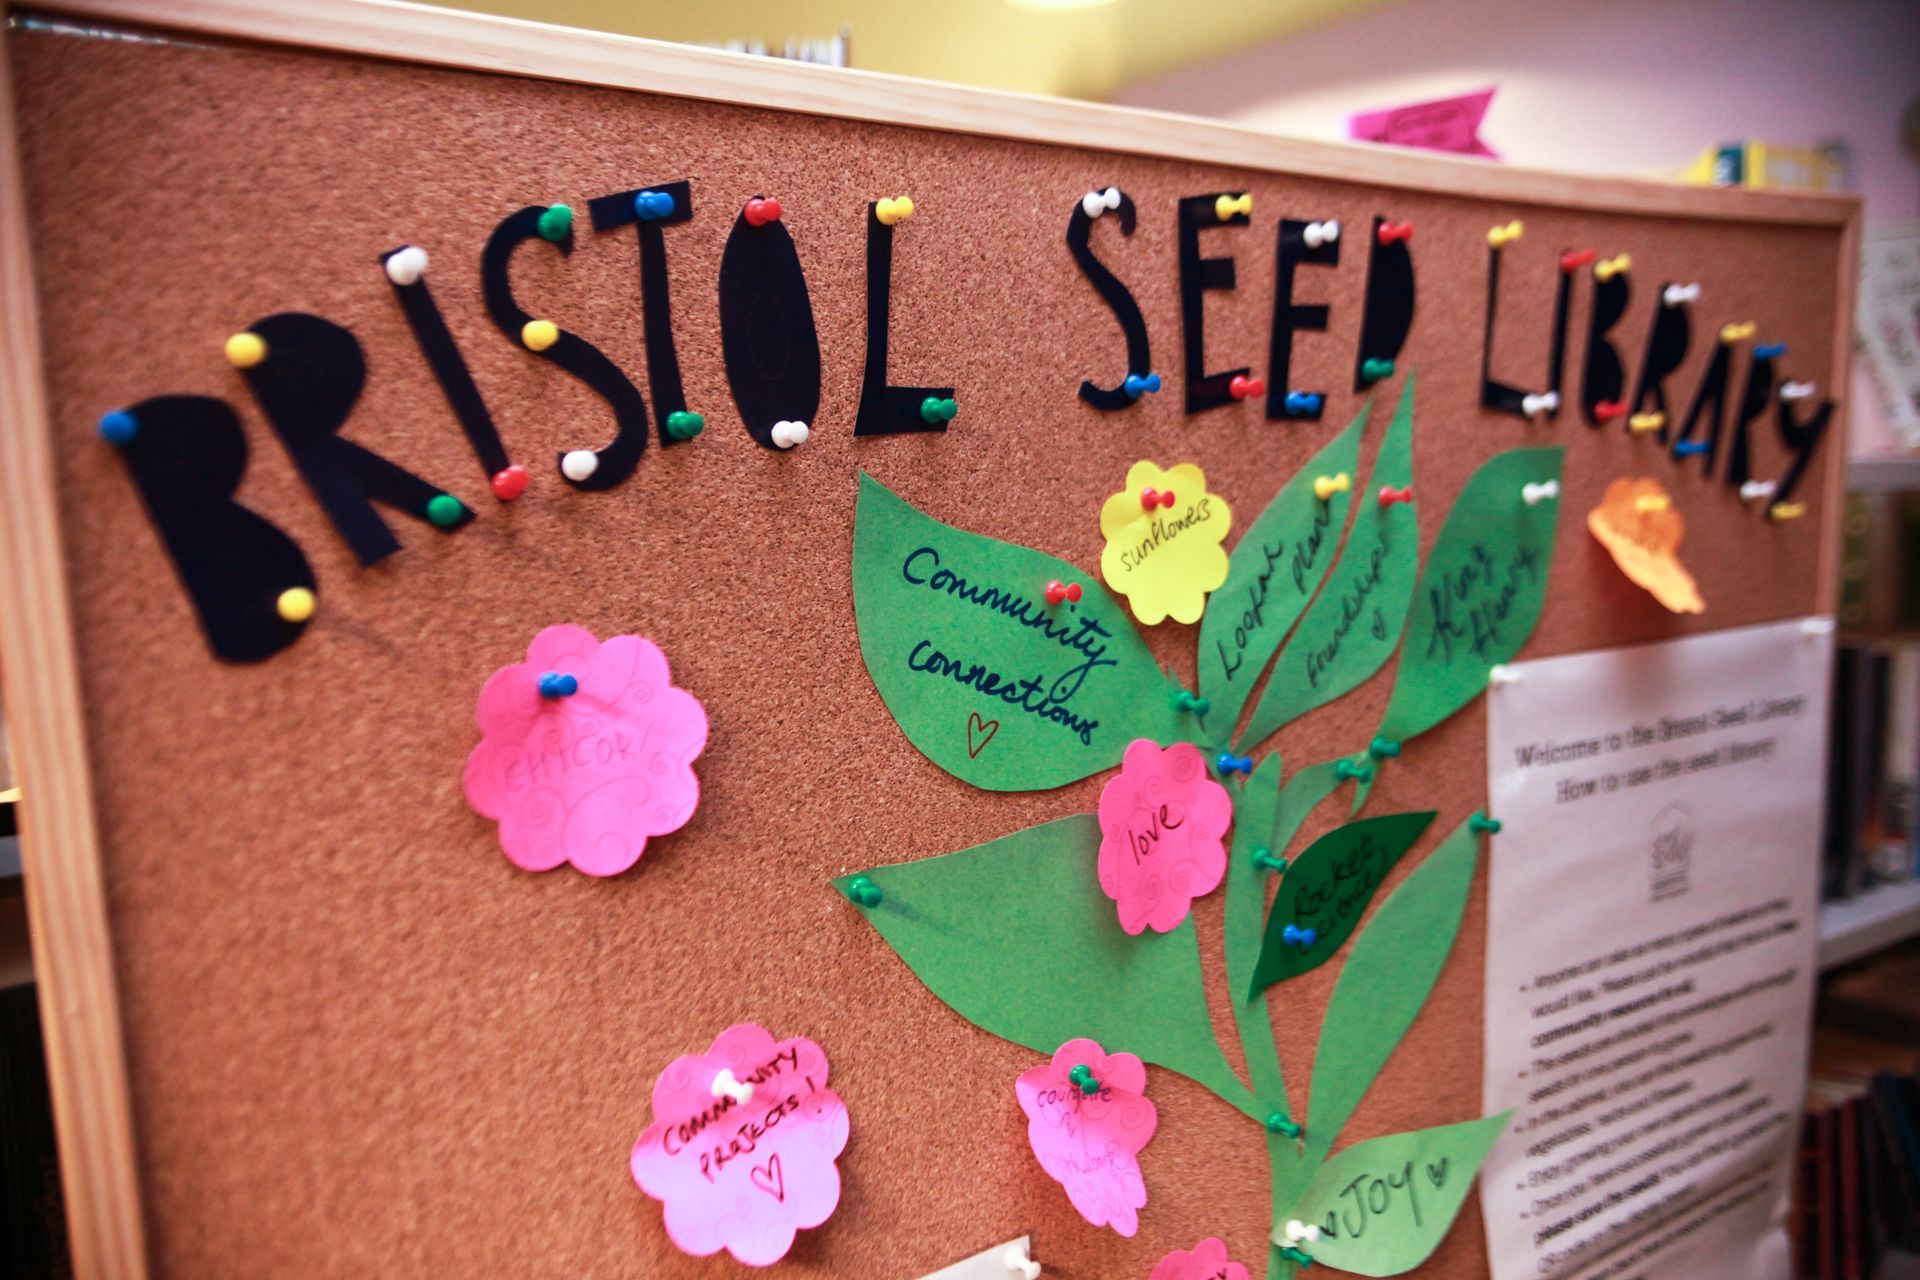 Bristol Seed Library noticeboard - post it notes are pinned in the shape of a flower